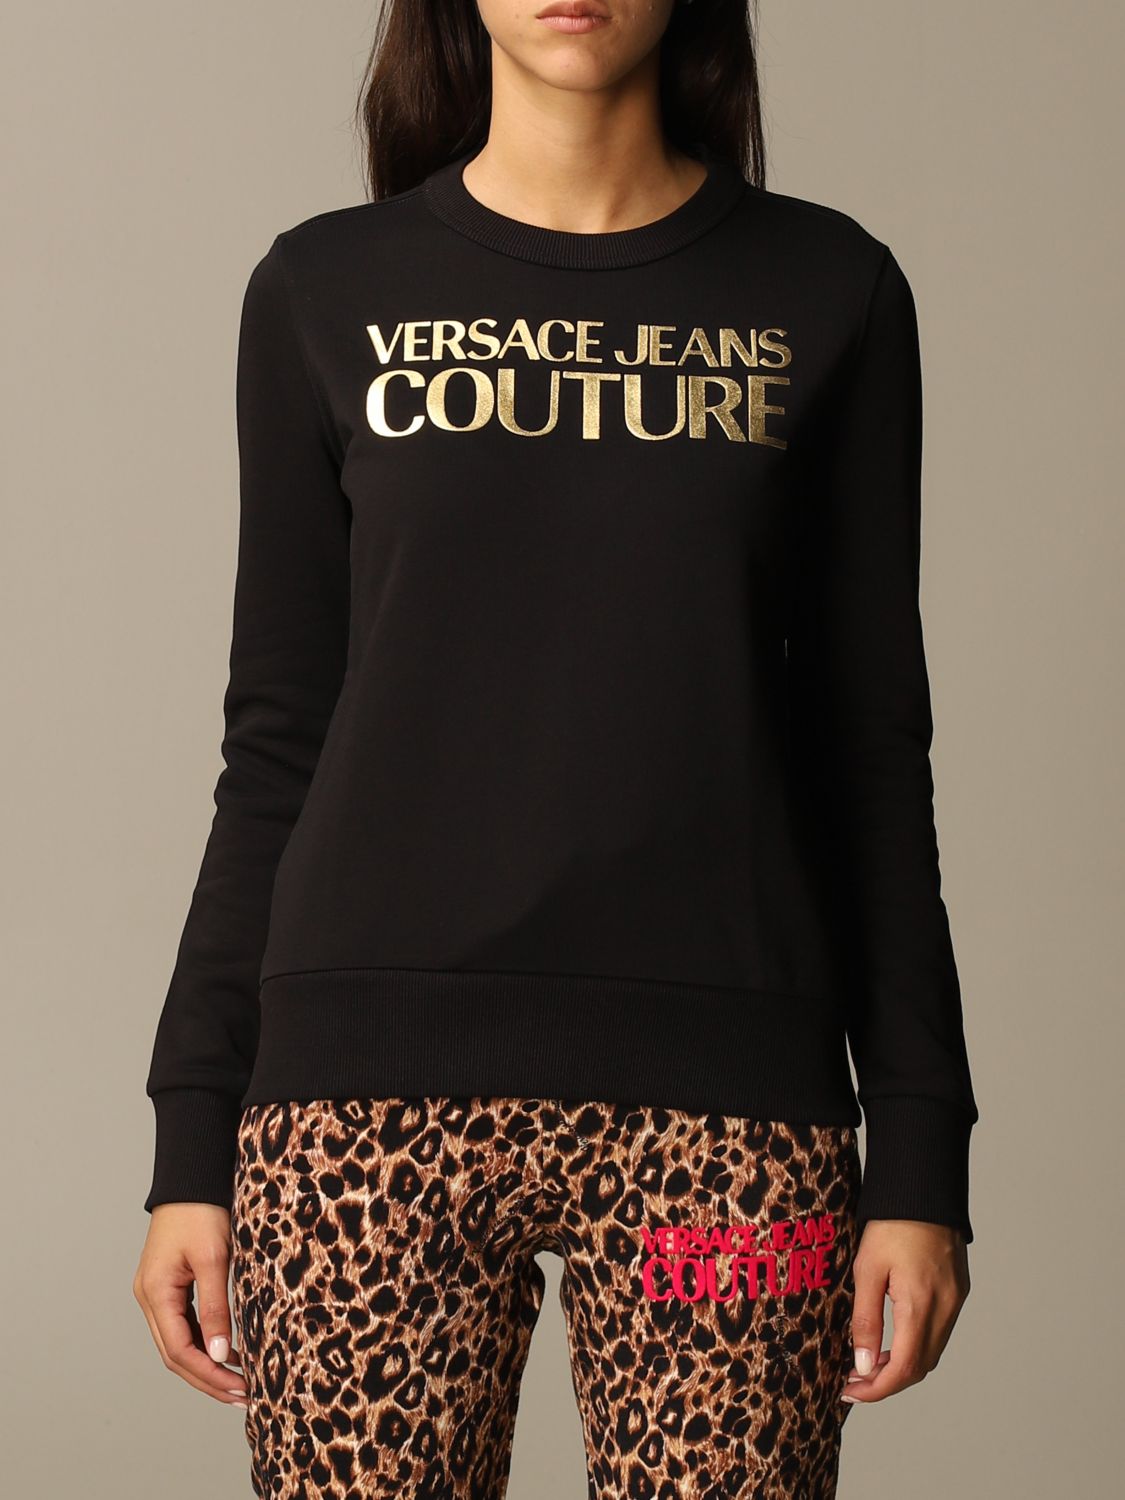 versace jeans couture women